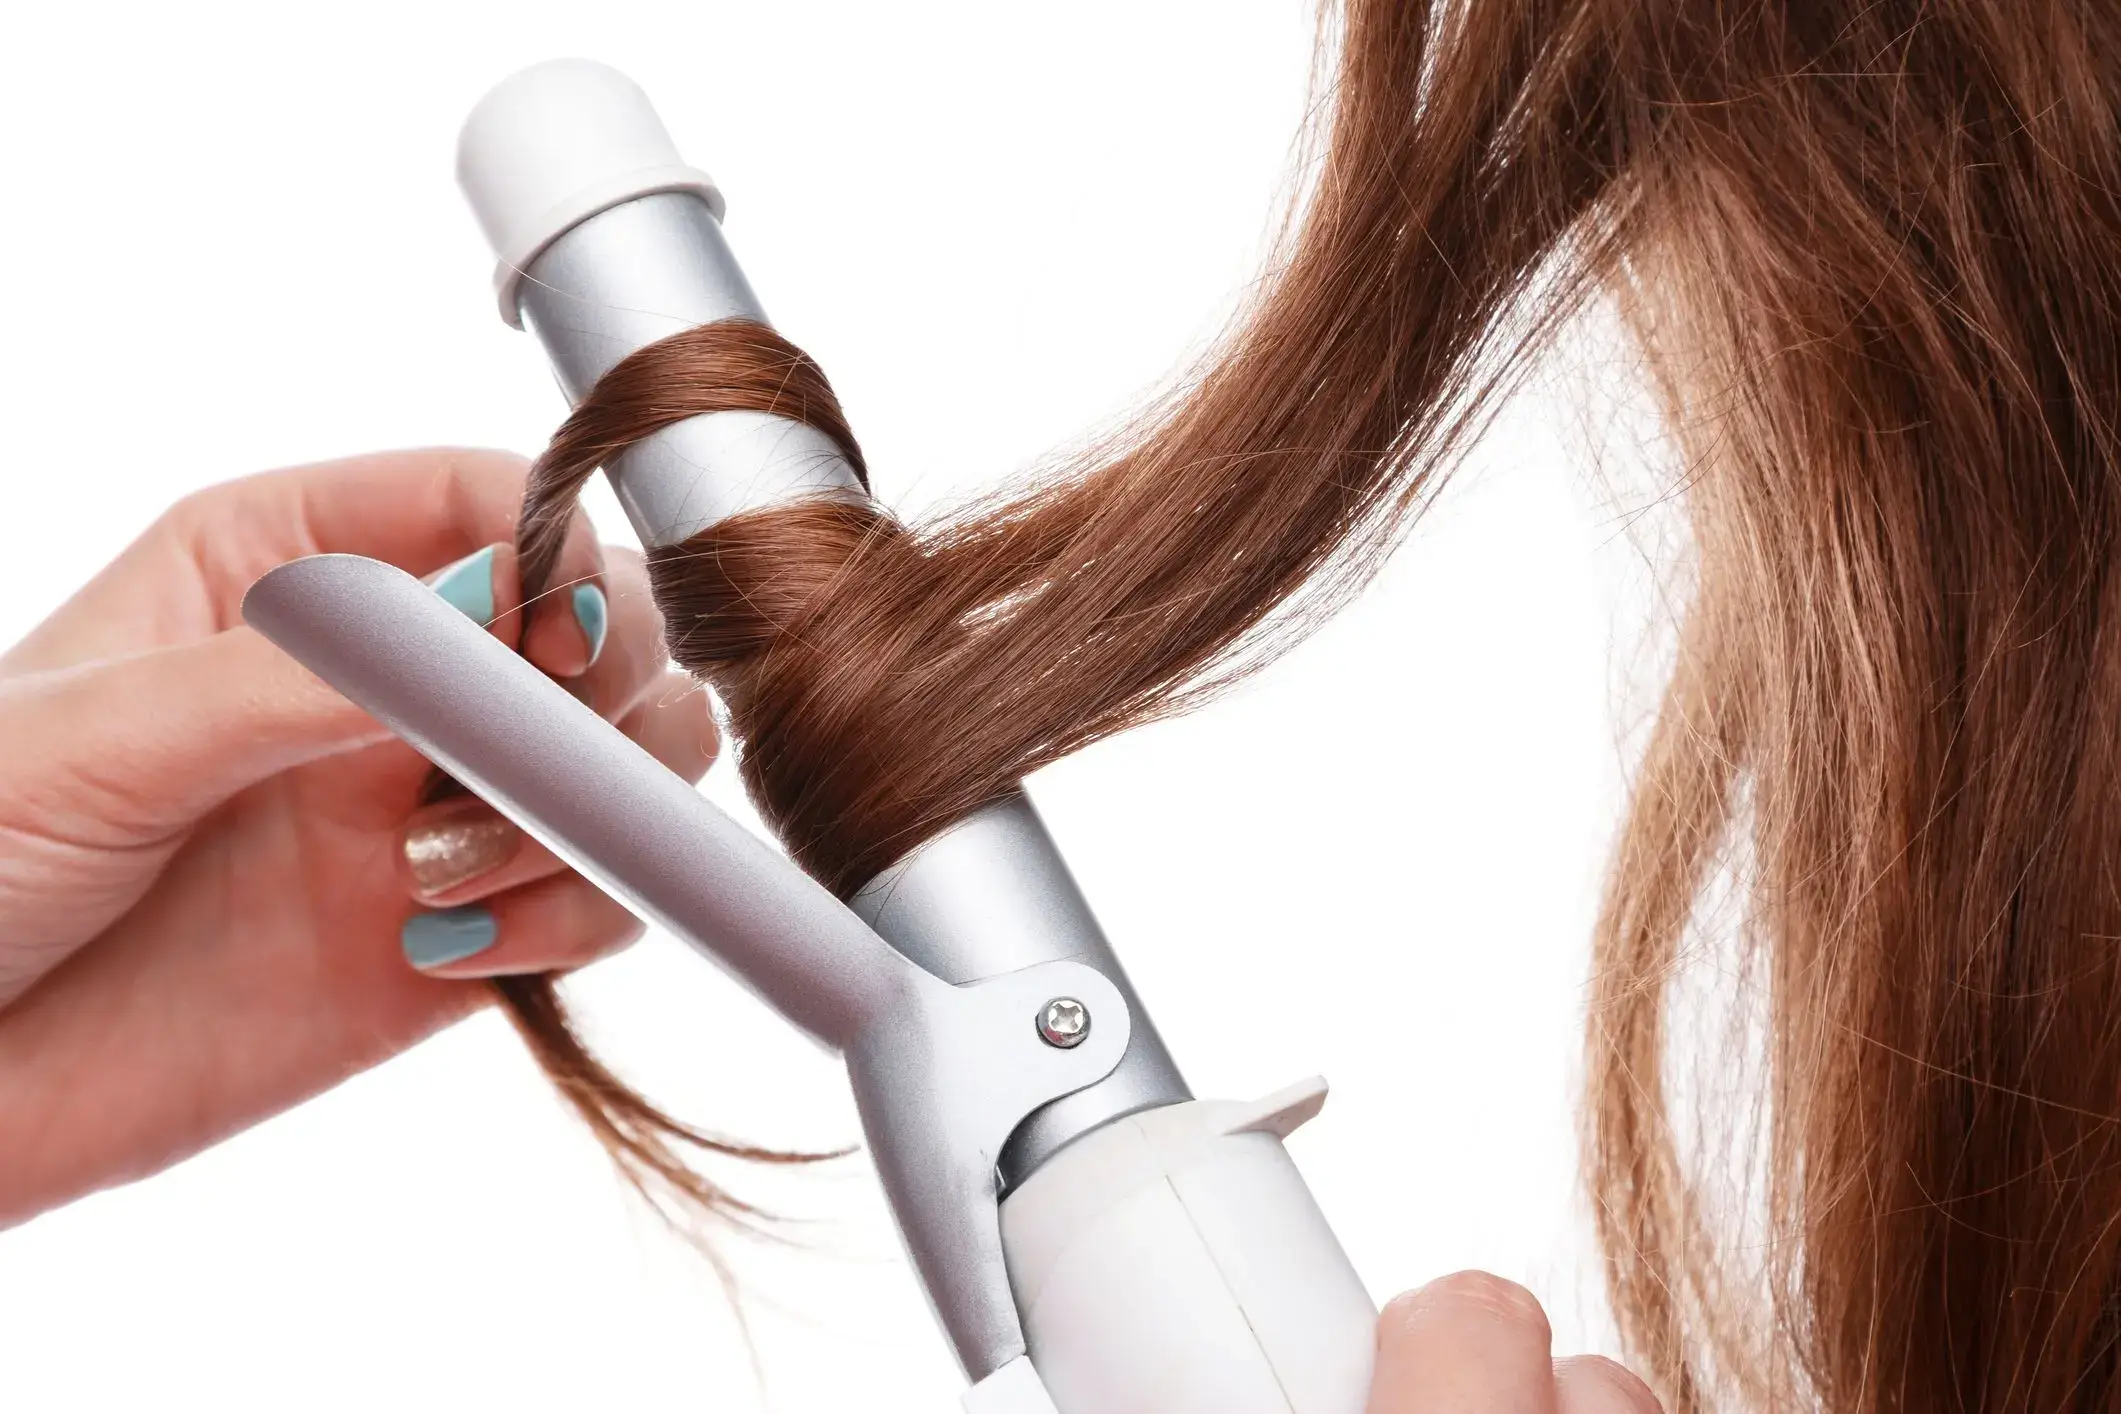 Close-up of hair being curled with a curling iron.